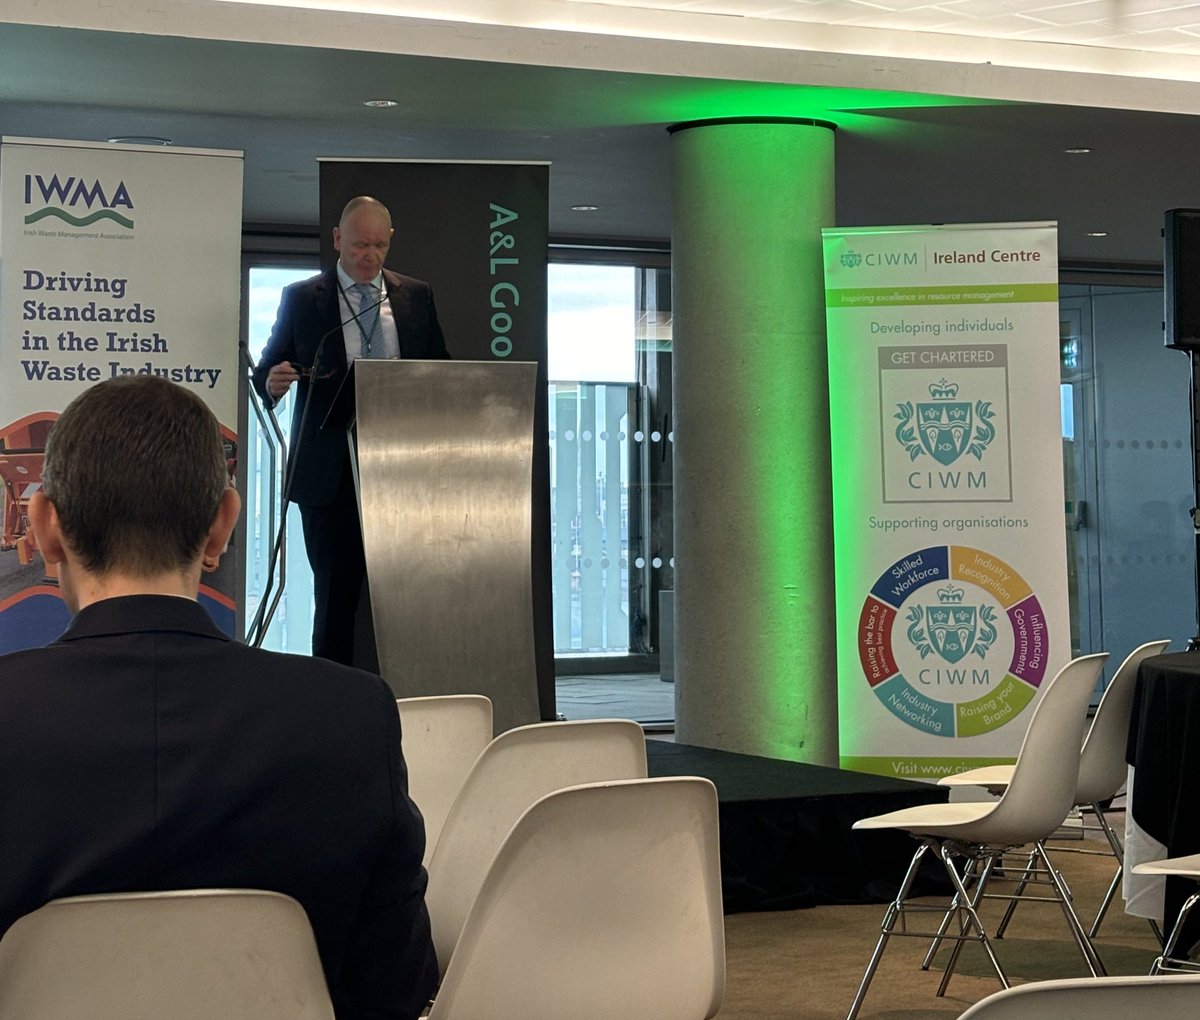 Some of our @CIWM members are in attendance at the IWMA / @ciwmirl waste management conference - eager to hear how circular economy is being implemented and how DRS is operating since its introduction in February